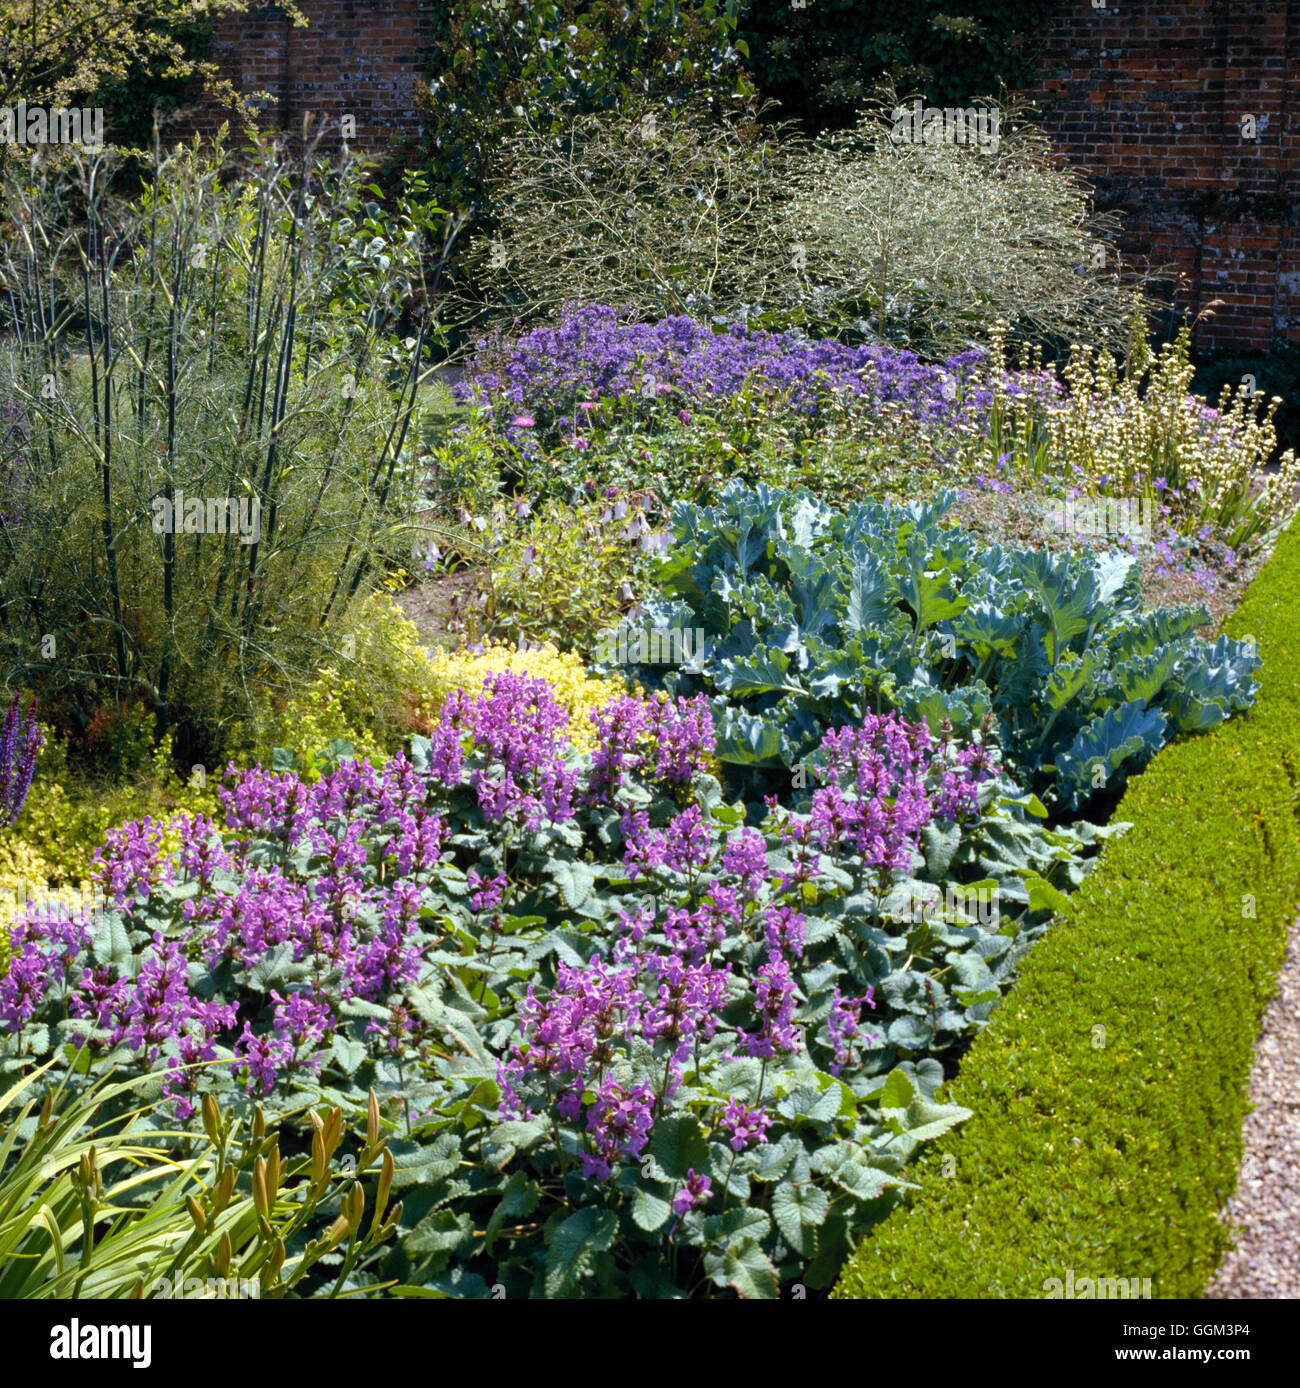 Perennial Border - with Stachys macrantha and Crambe maritima edged with Buxus/Box   PGN01' Stock Photo